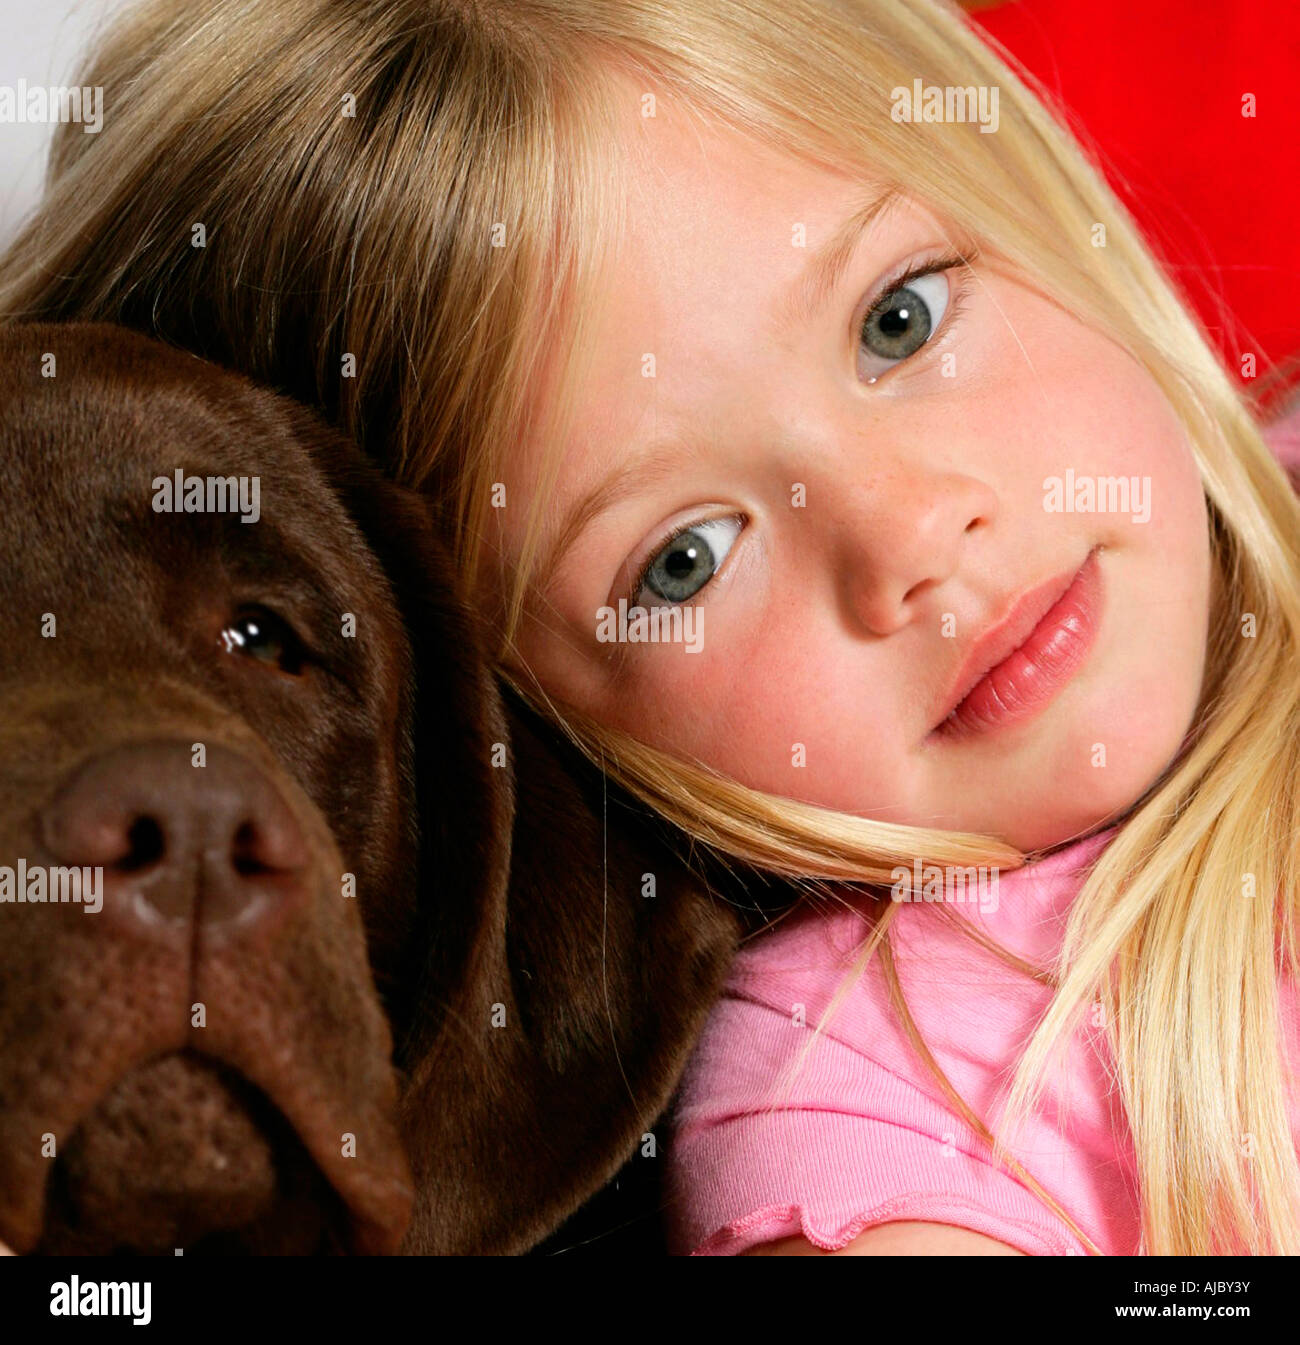 Portrait of a Young Girl and her Dog at Christmas Stock Photo